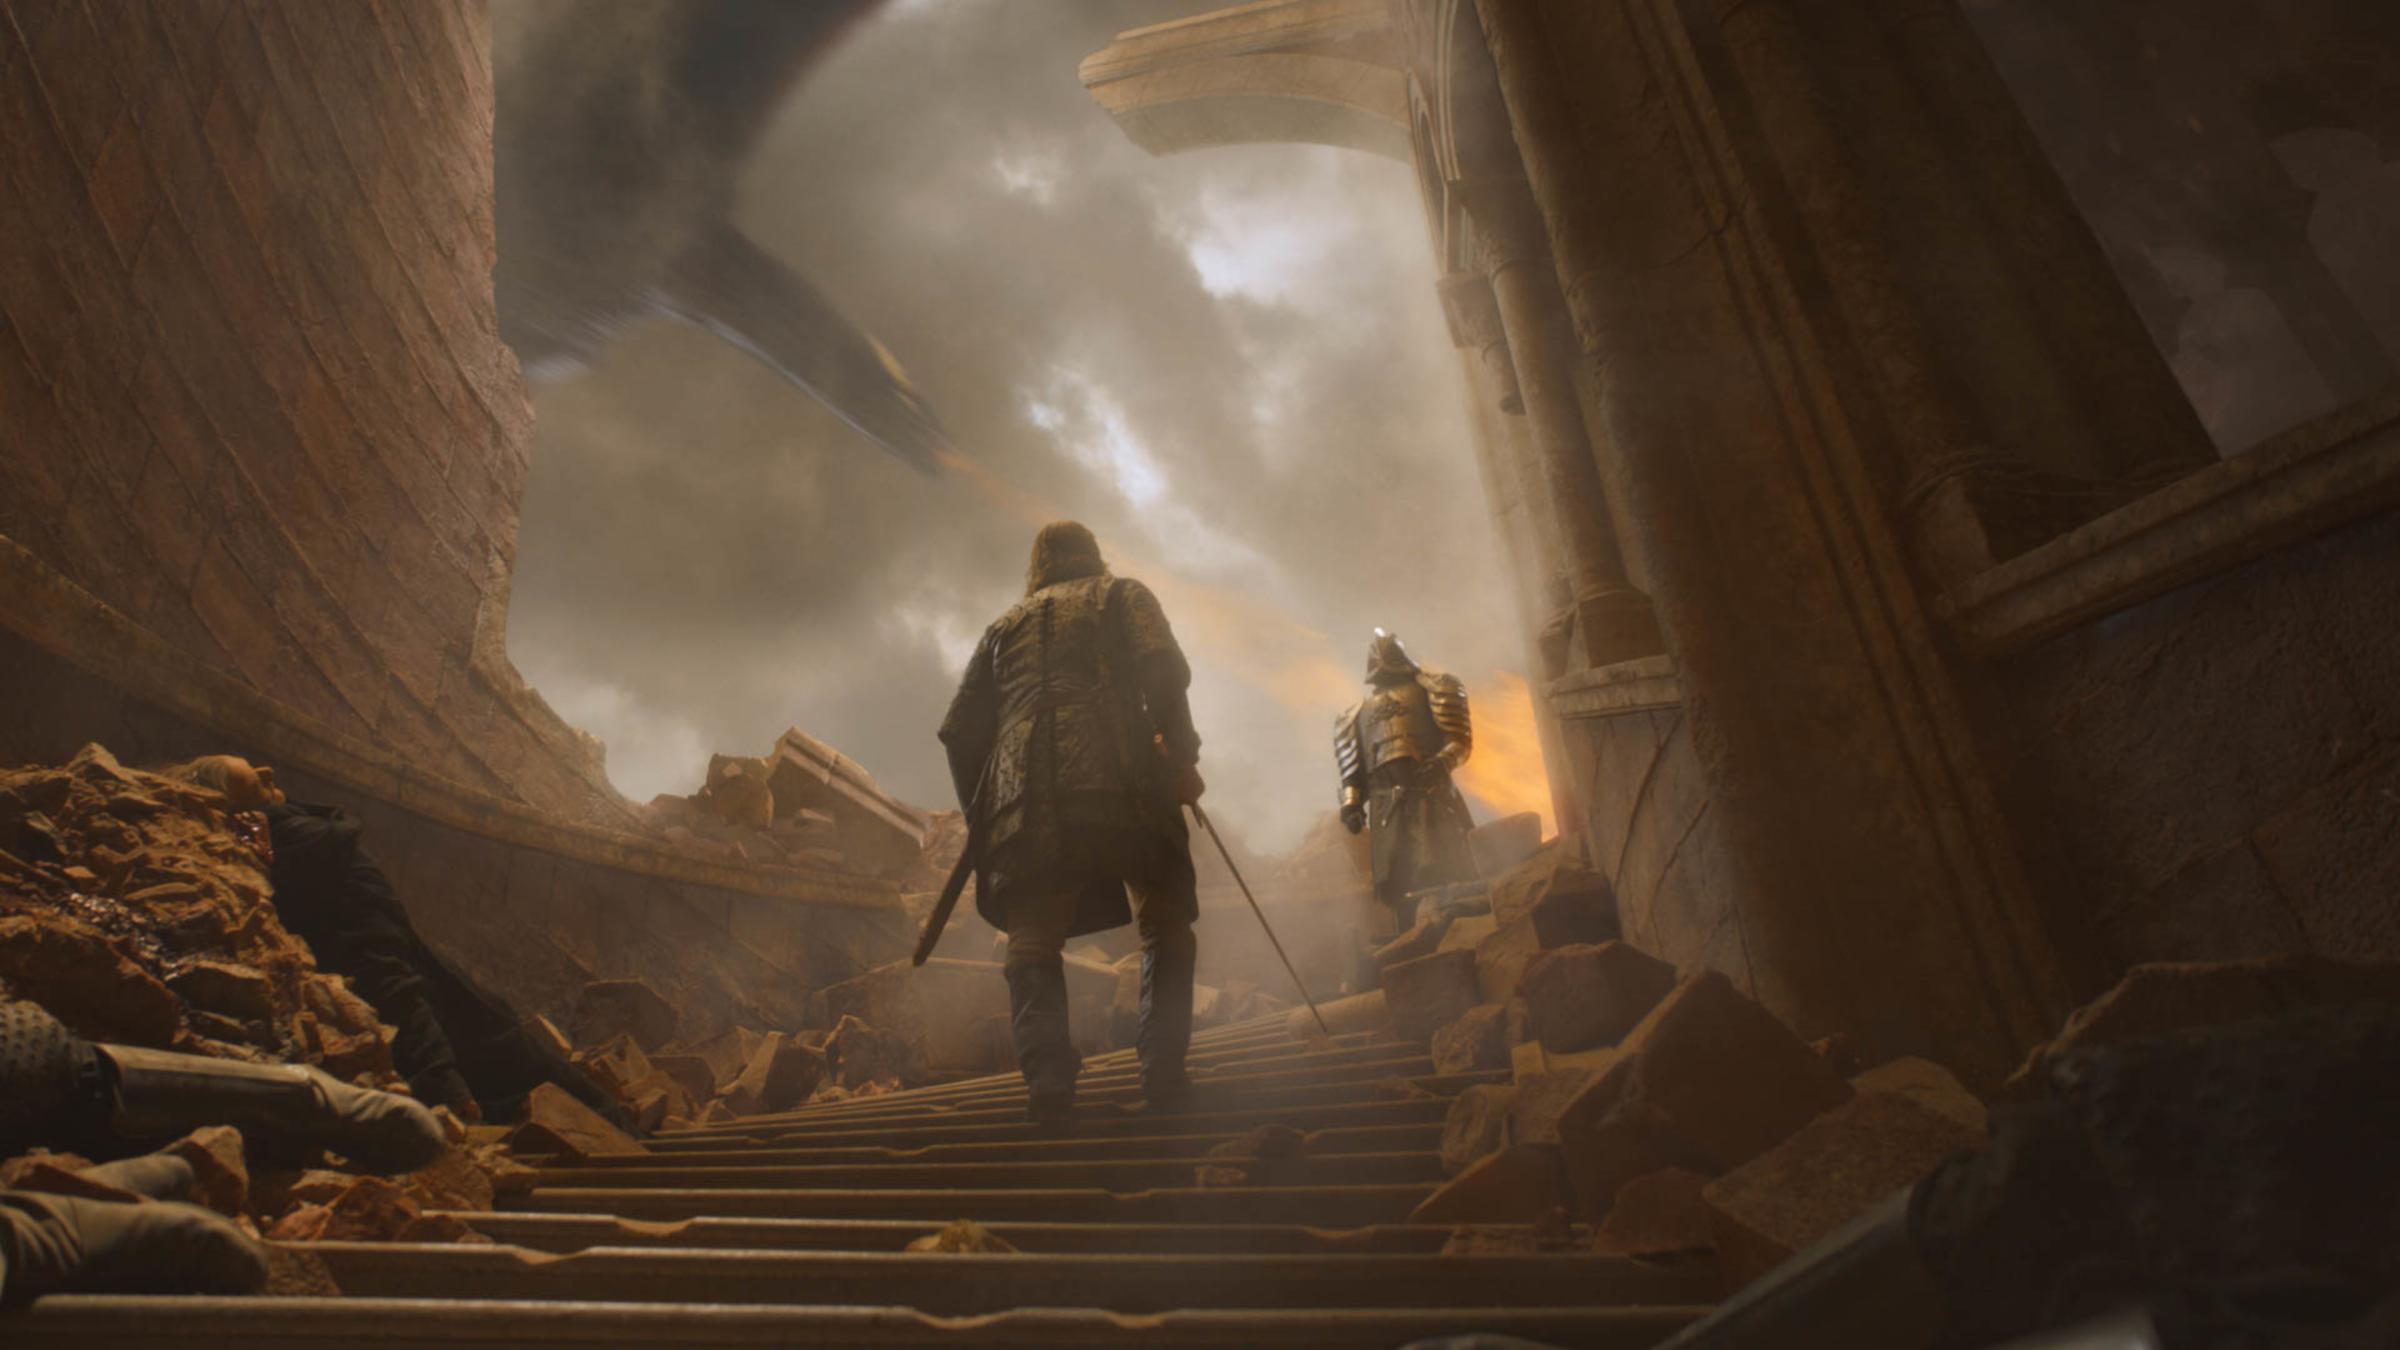 Fans have been waiting for Cleganebowl to happen on Game of Thrones forever